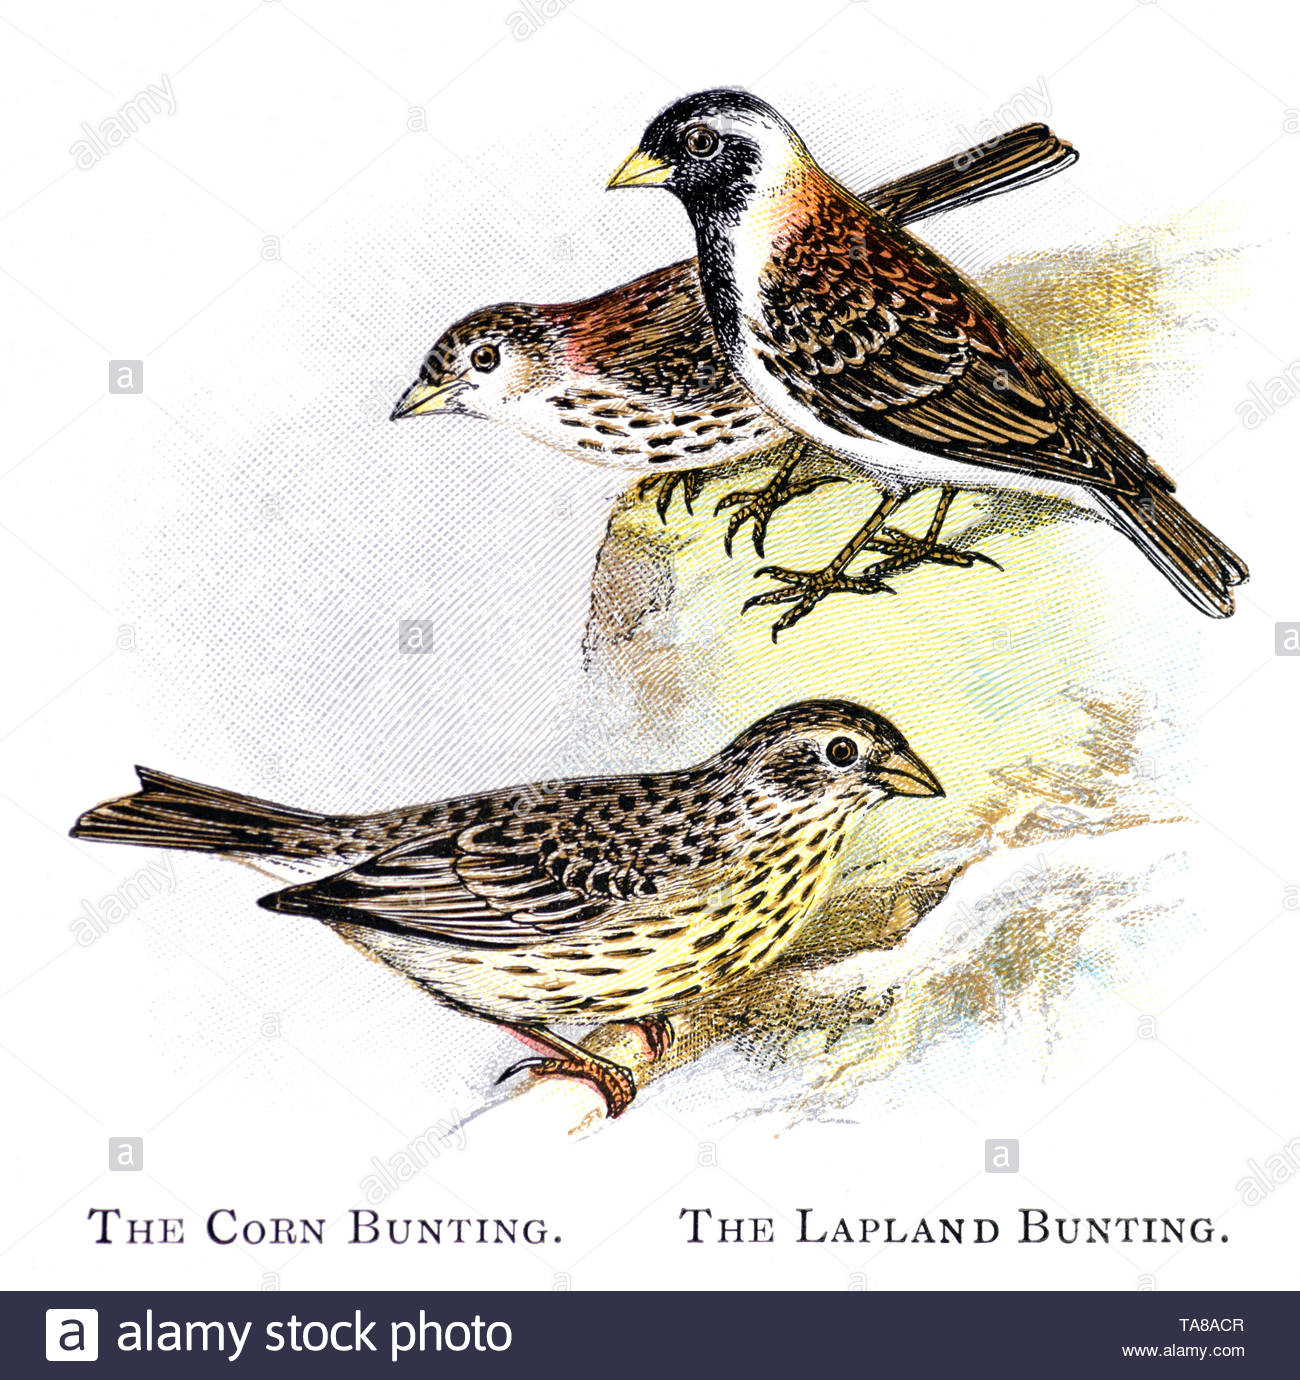 Corn Bunting (Emberiza calandra) and Lapland Bunting (Calcarius lapponicus), vintage illustration published in 1898 Stock Photo